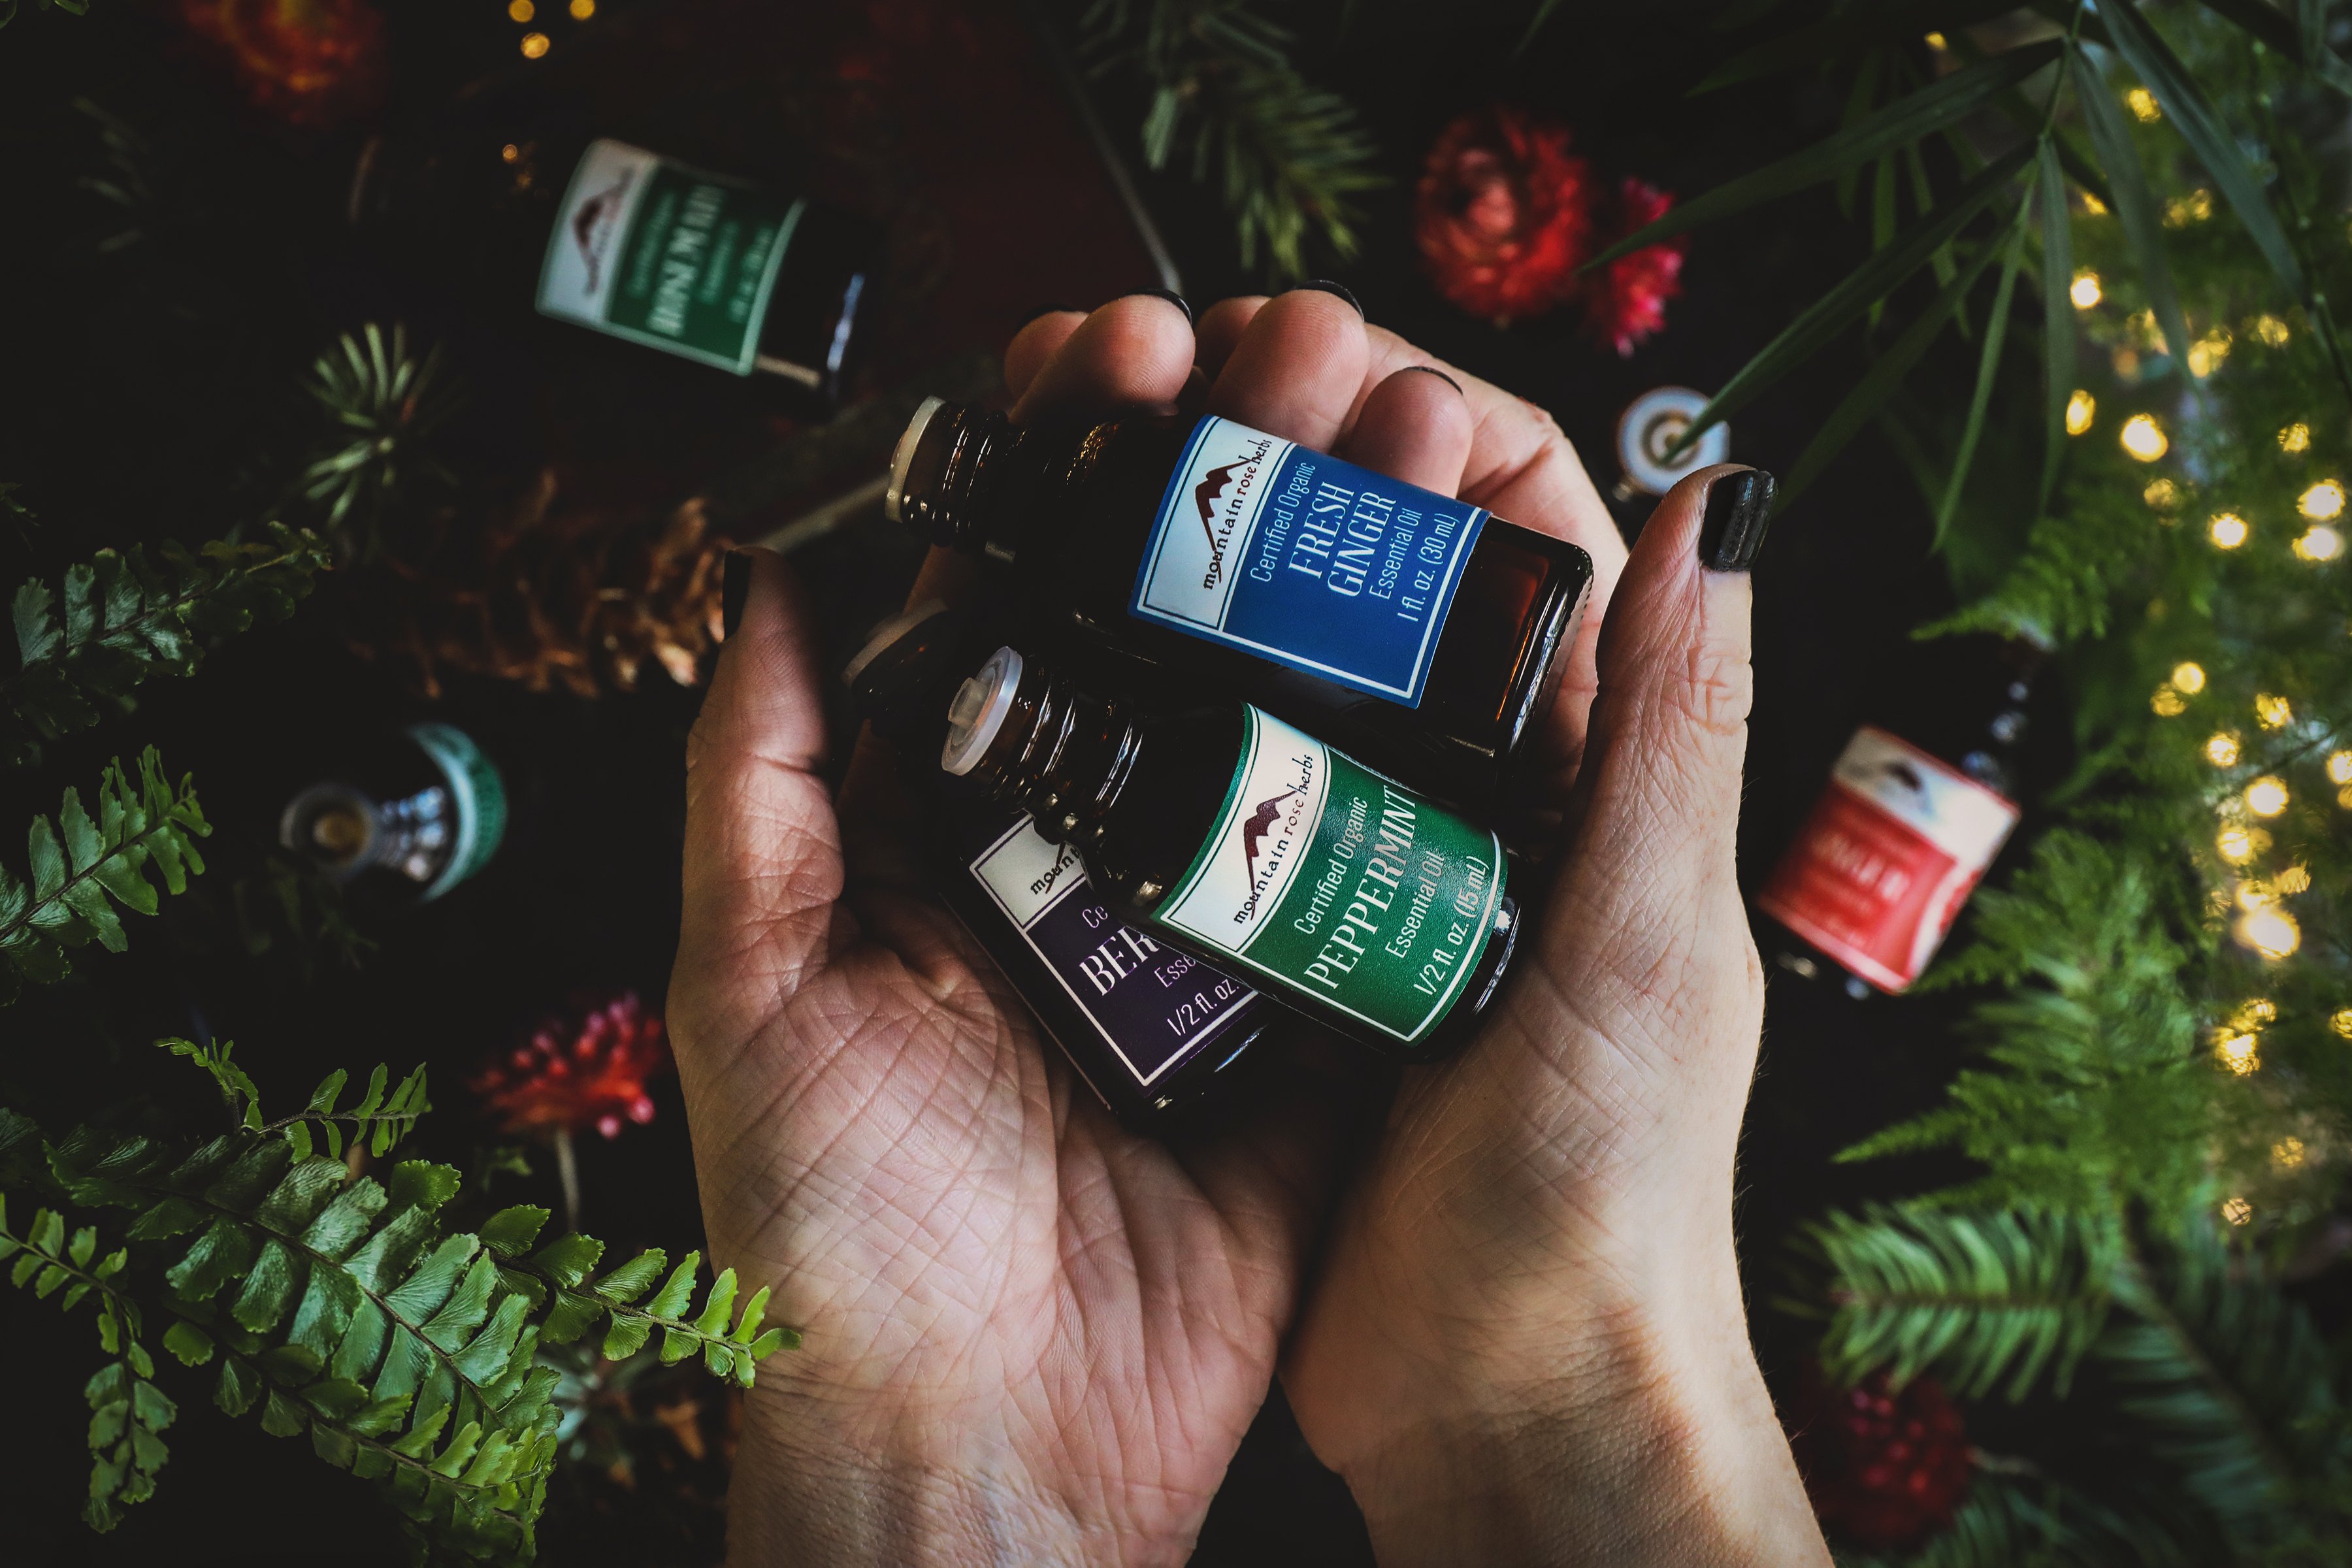 30 Essential Oil Diffuser Blends for the Winter Holidays